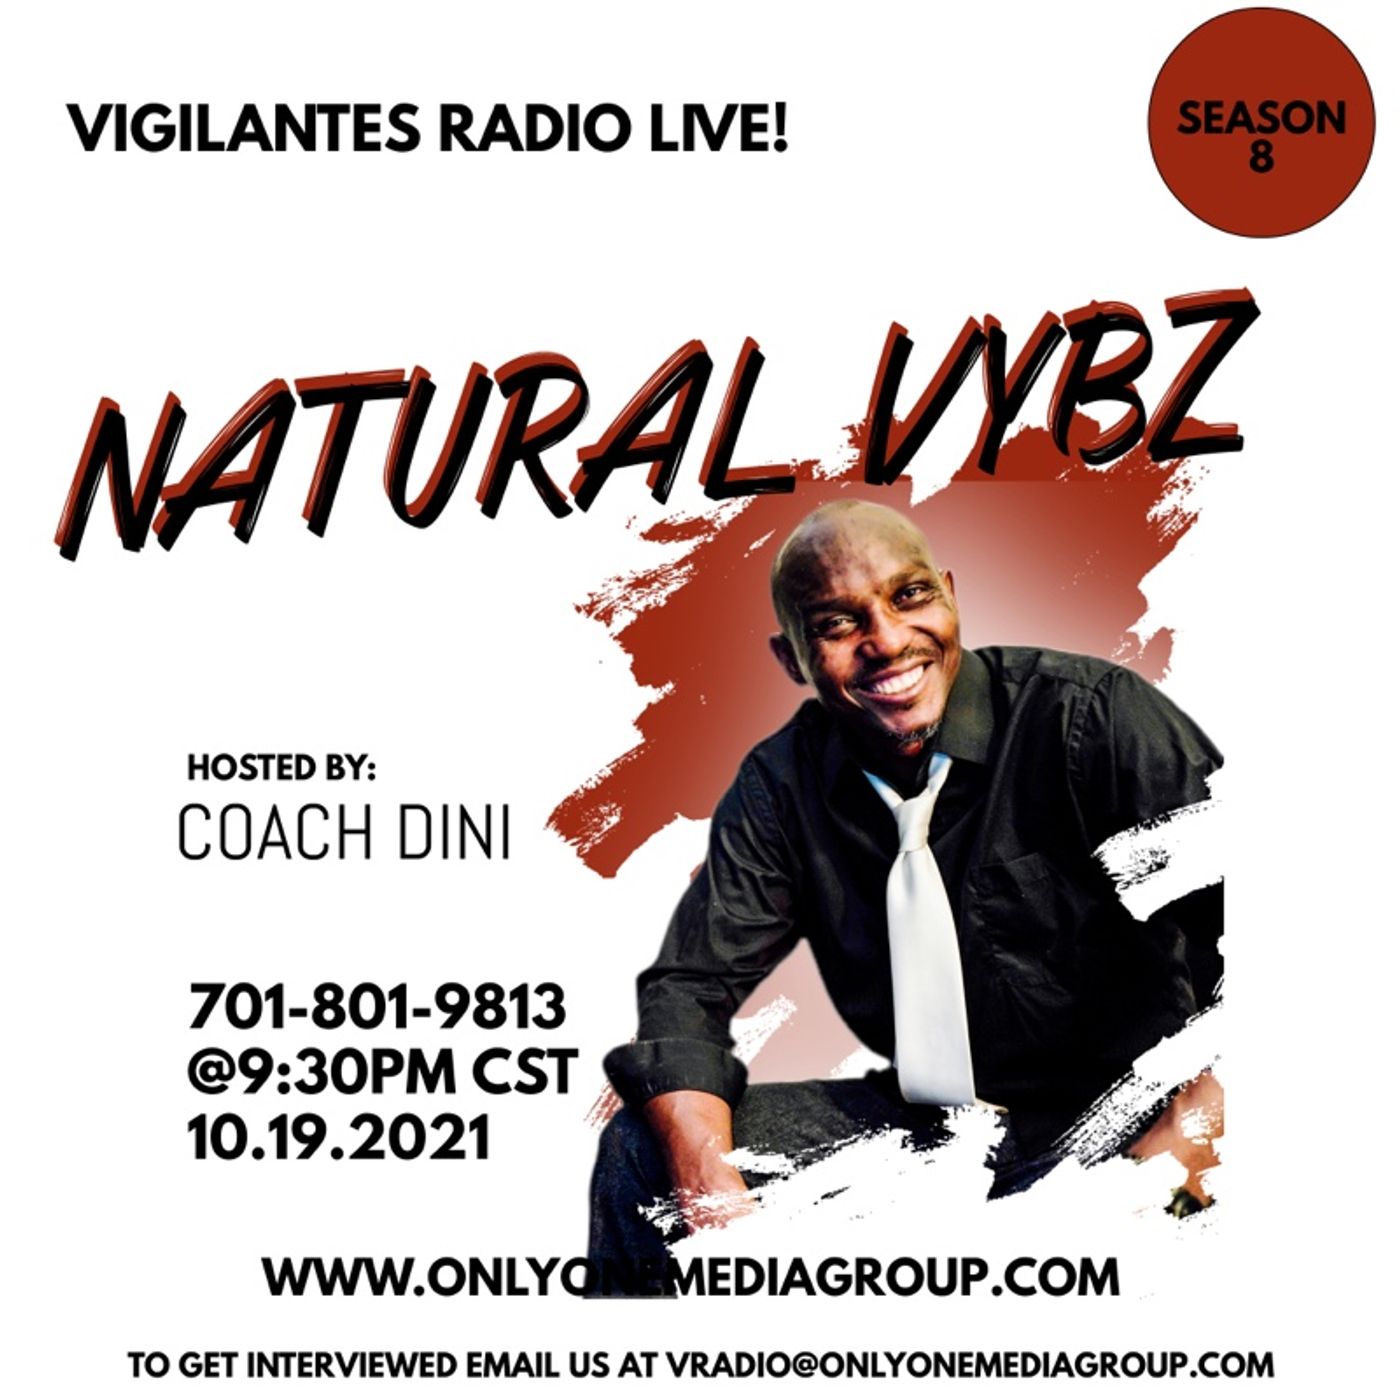 The Natural Vybz Interview.